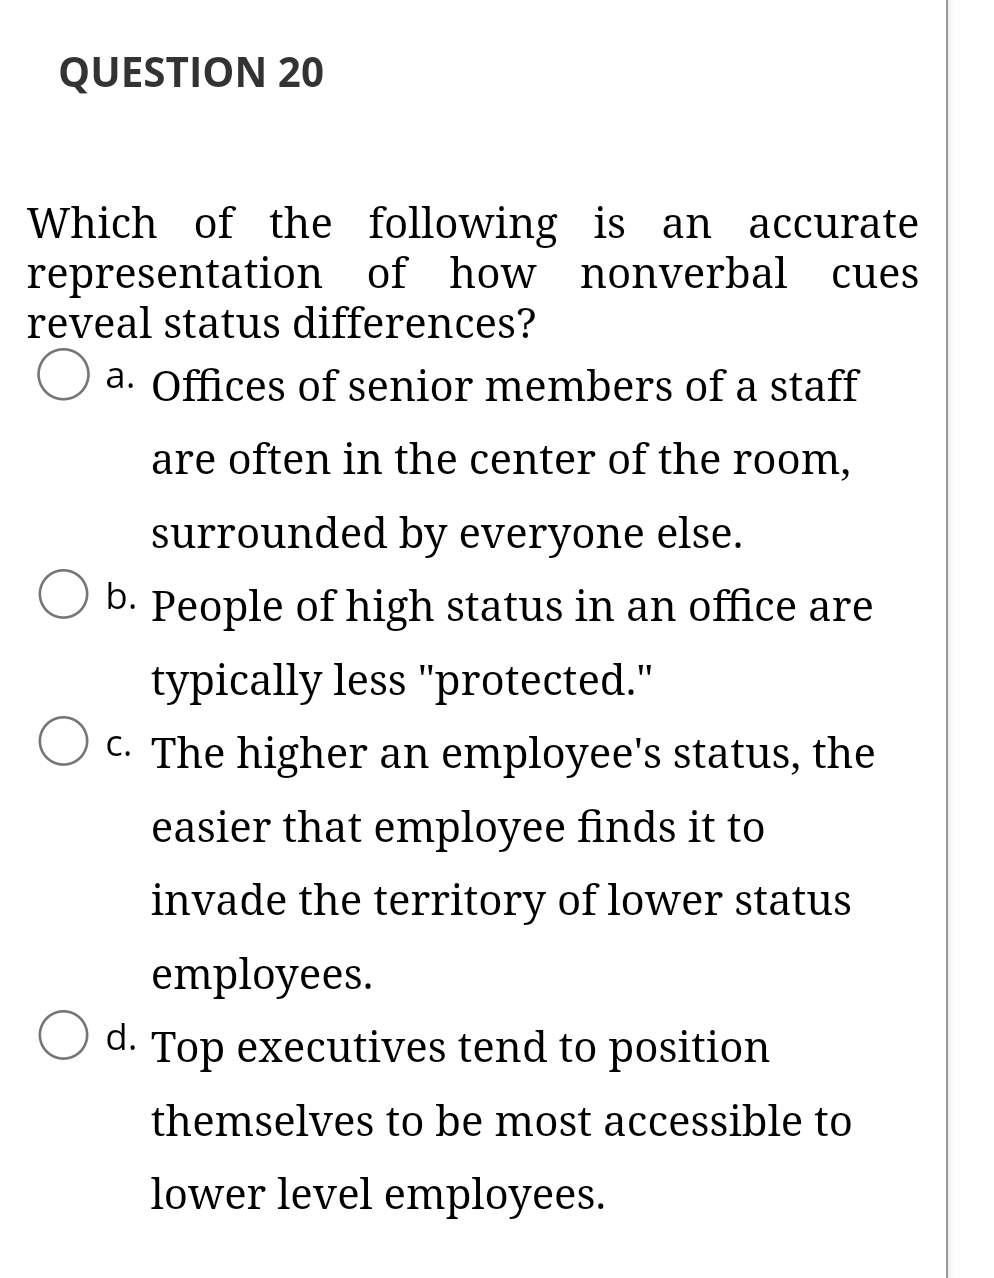 QUESTION 20
Which of the following is an accurate
representation of how nonverbal cues
reveal status differences?
O a. Offices of senior members of a staff
are often in the center of the room,
surrounded by everyone else.
b. People of high status in an office are
typically less "protected."
C. The higher an employee's status, the
easier that employee finds it to
invade the territory of lower status
employees.
O d. Top executives tend to position
themselves to be most accessible to
lower level employees.
